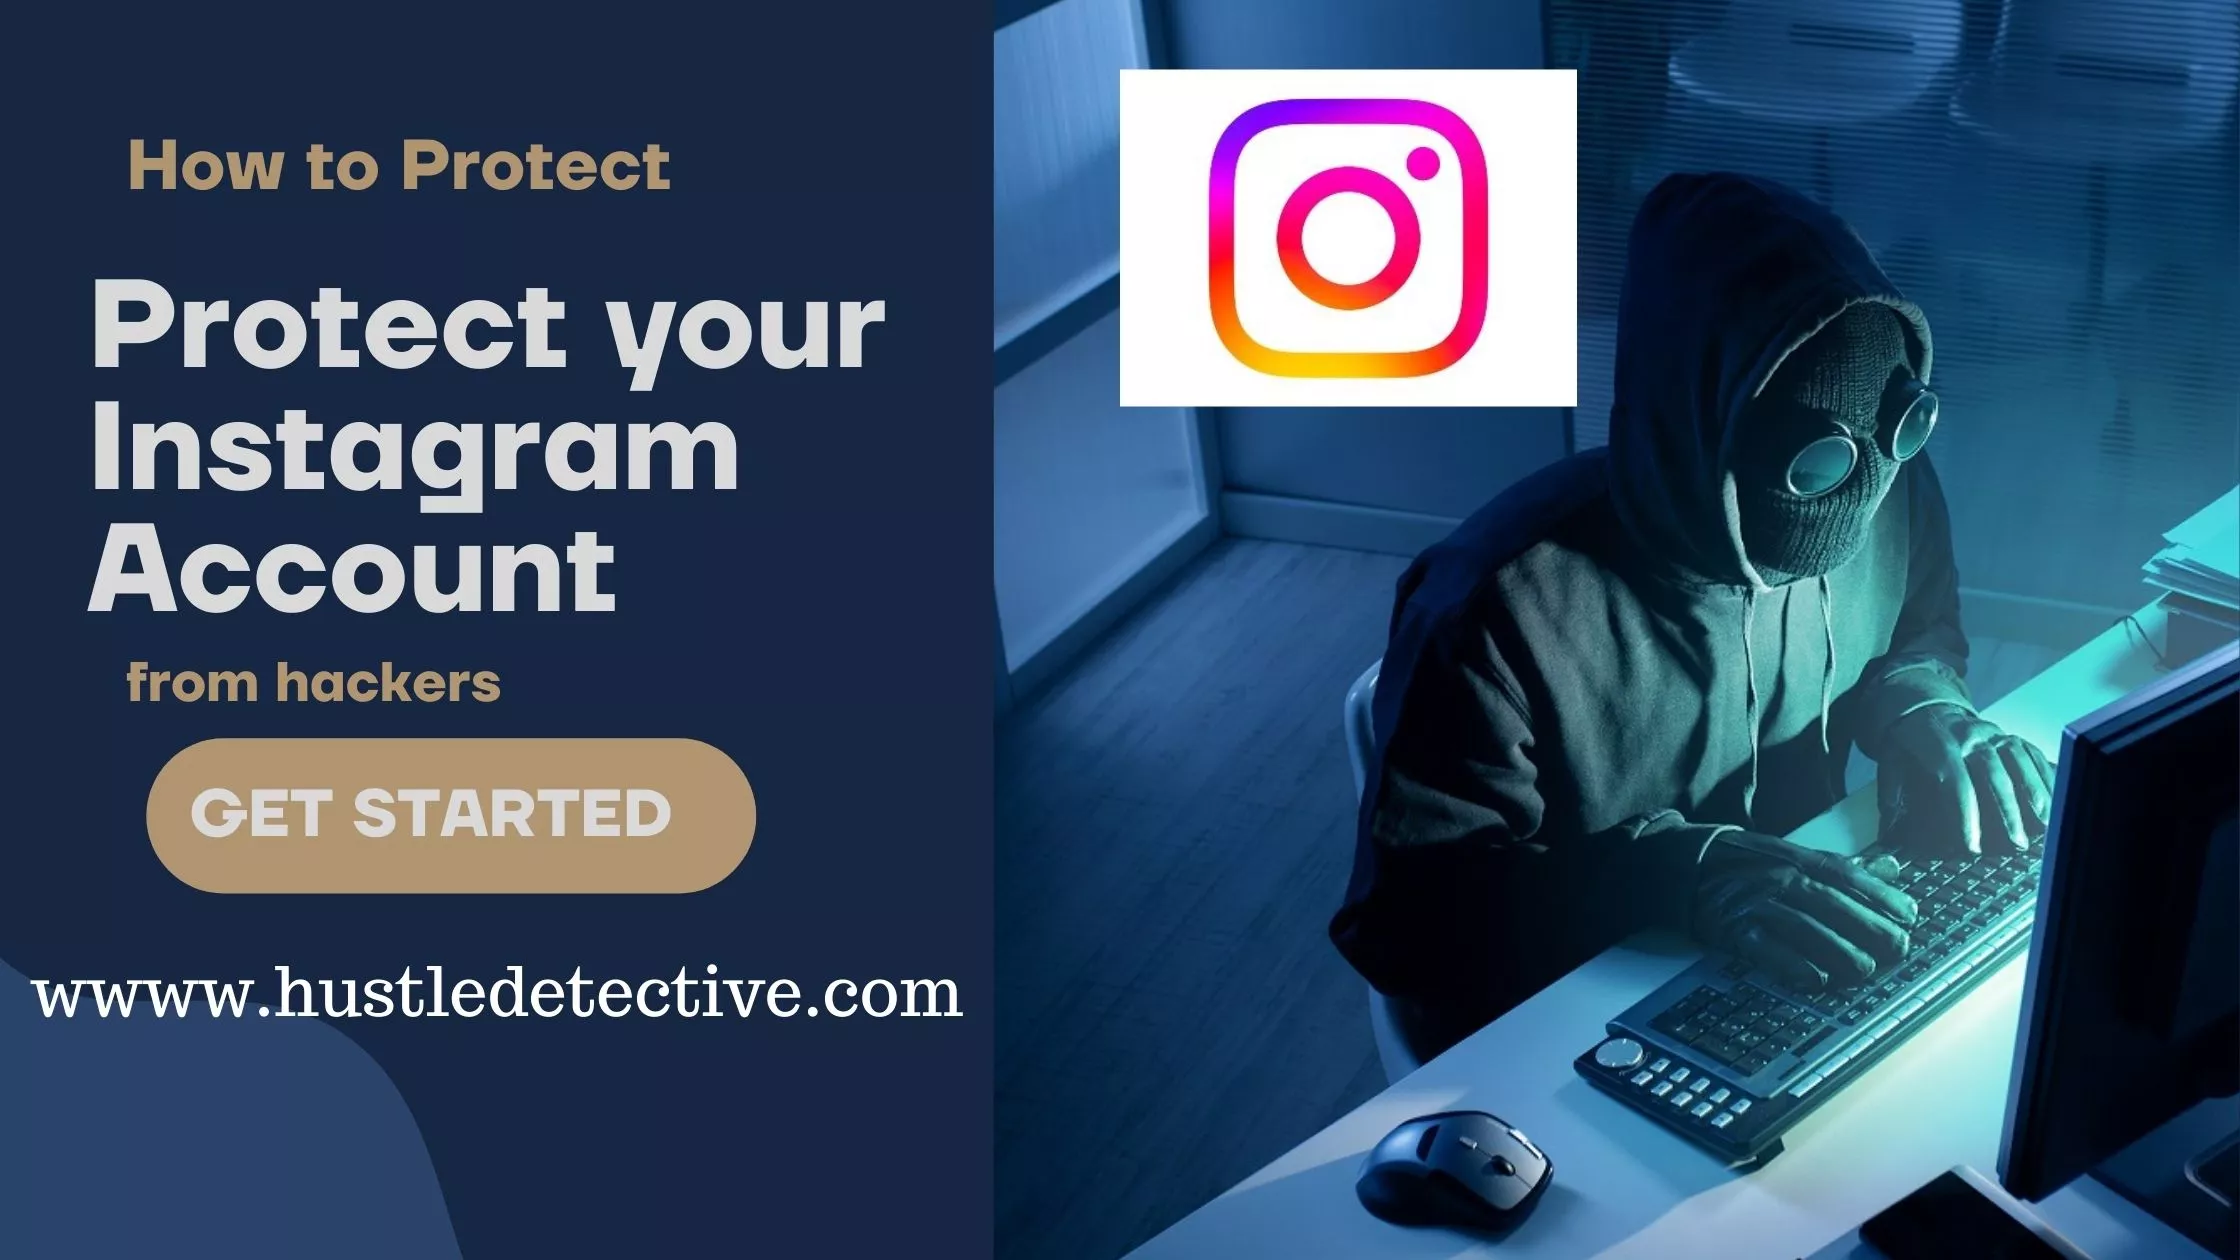 8 Super Steps To Protect your Instagram Account from Hackers.